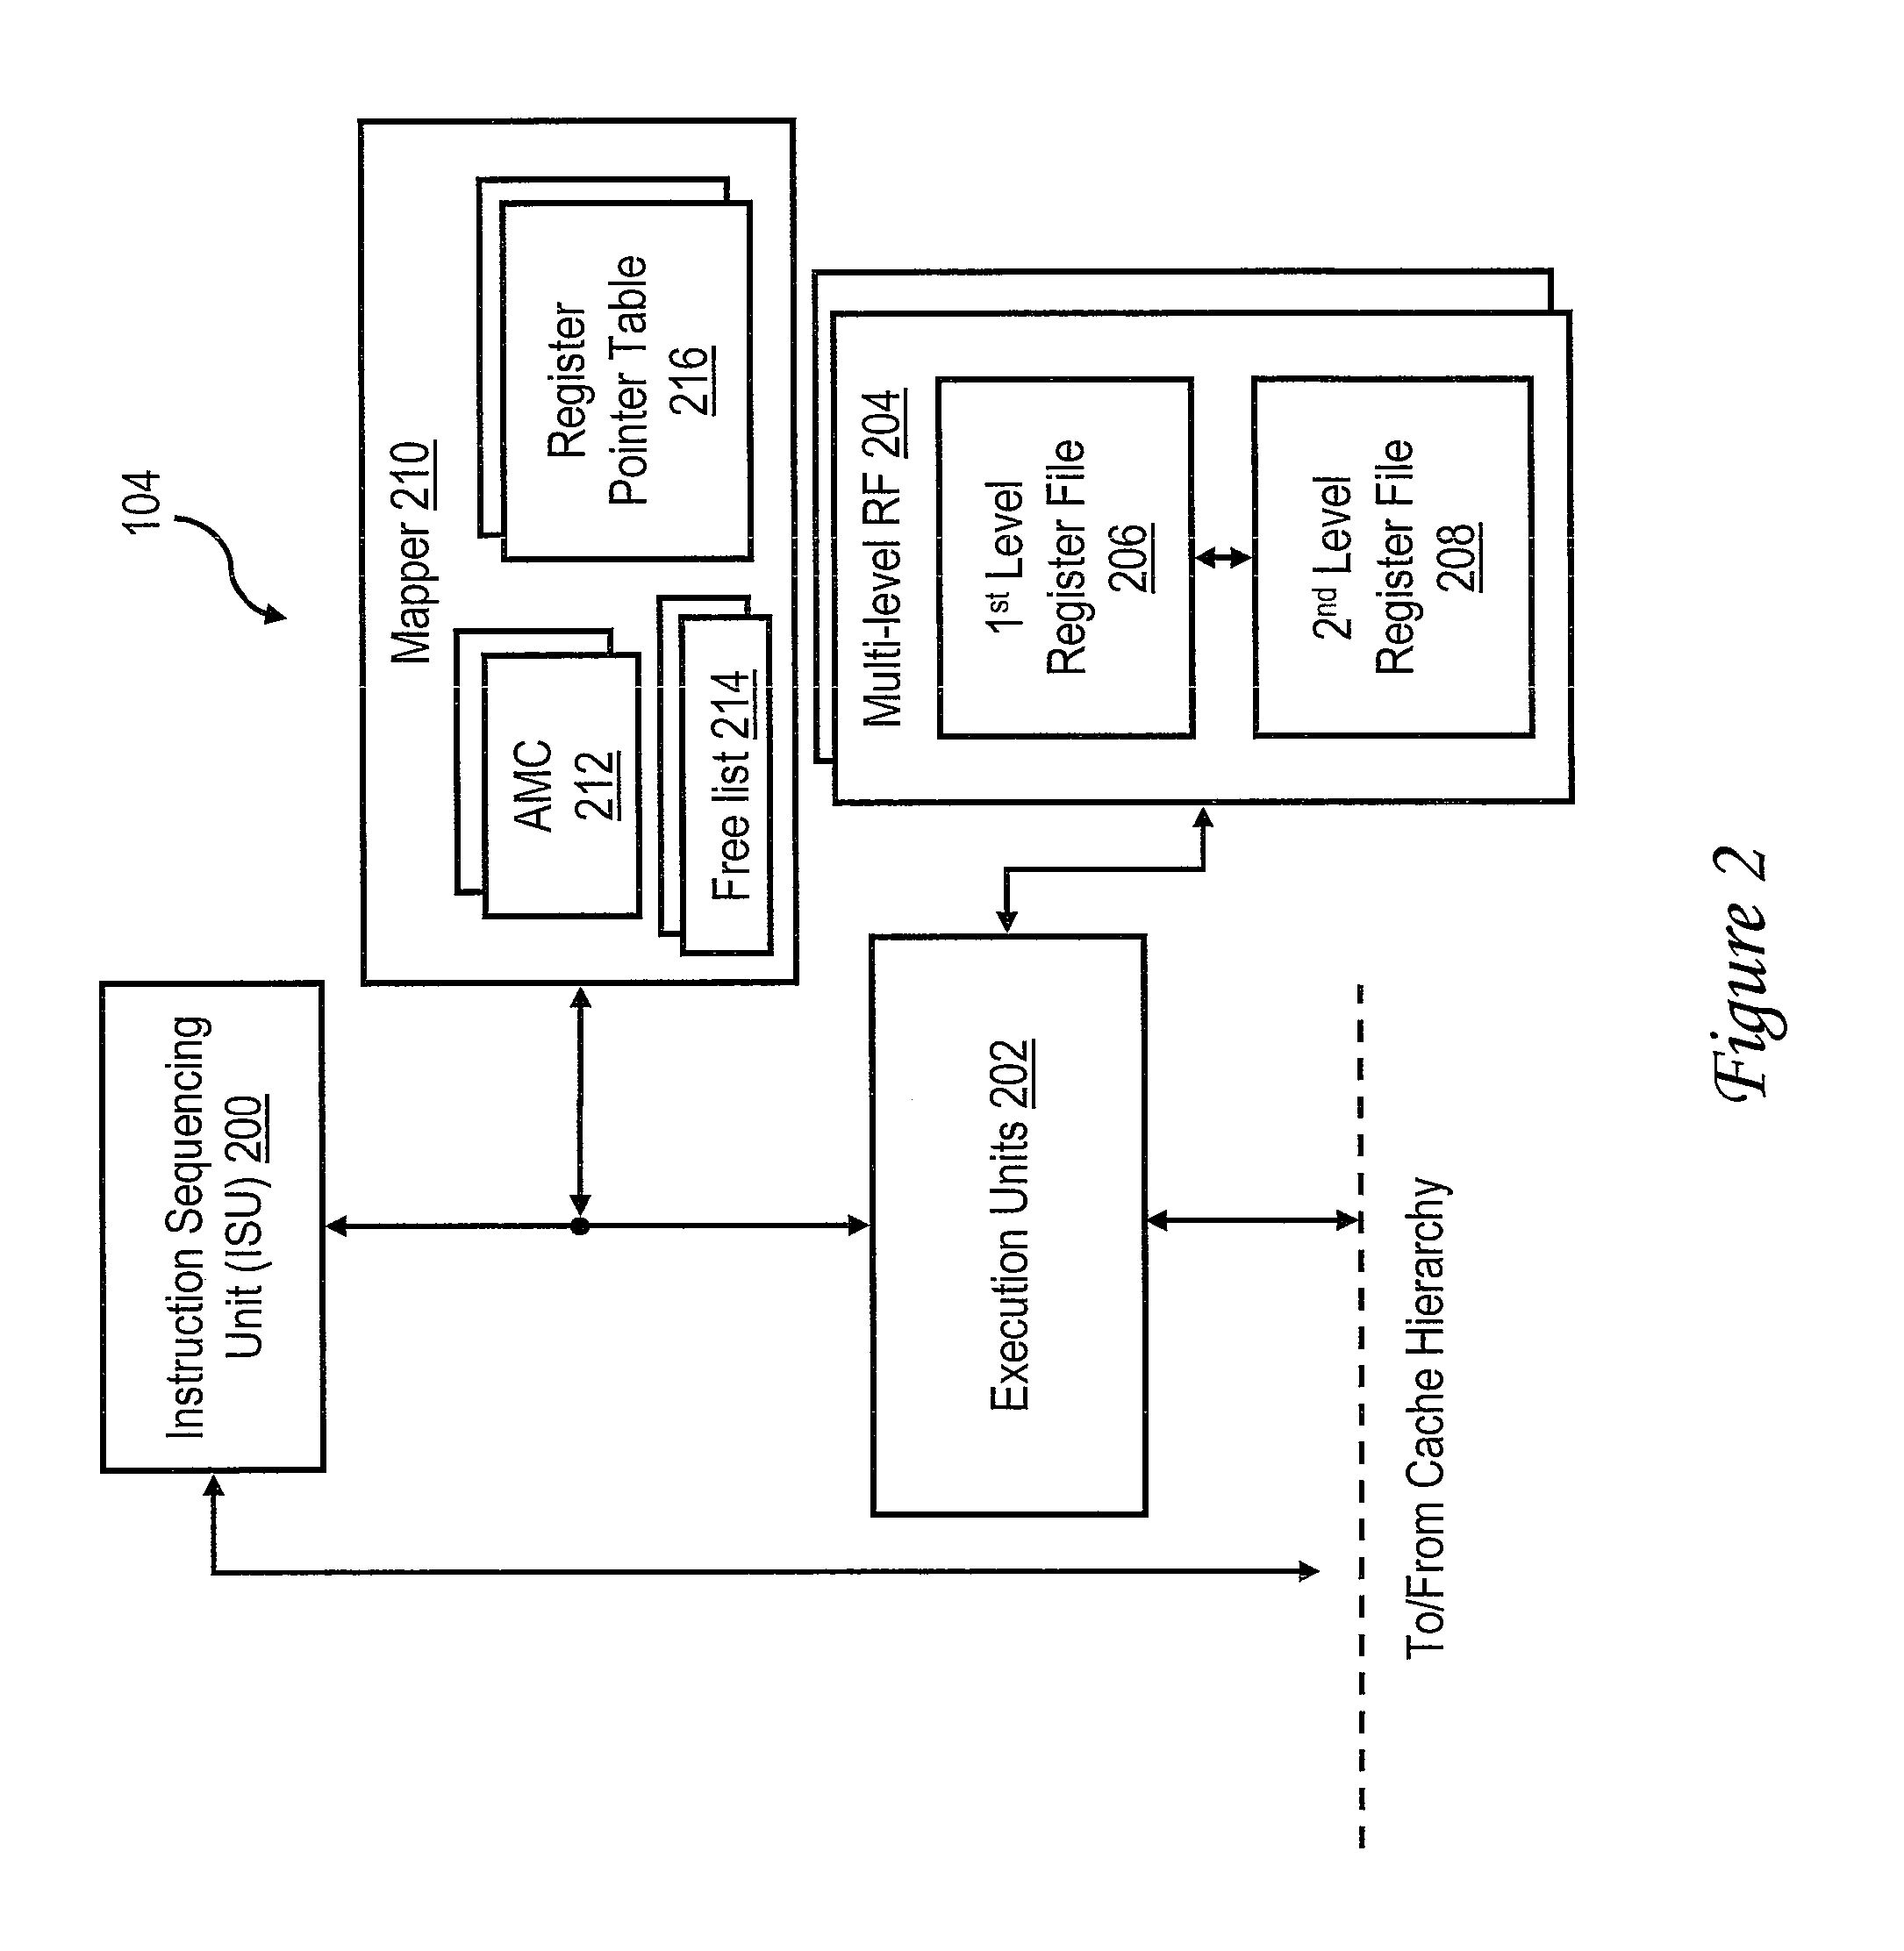 Register file supporting transactional processing